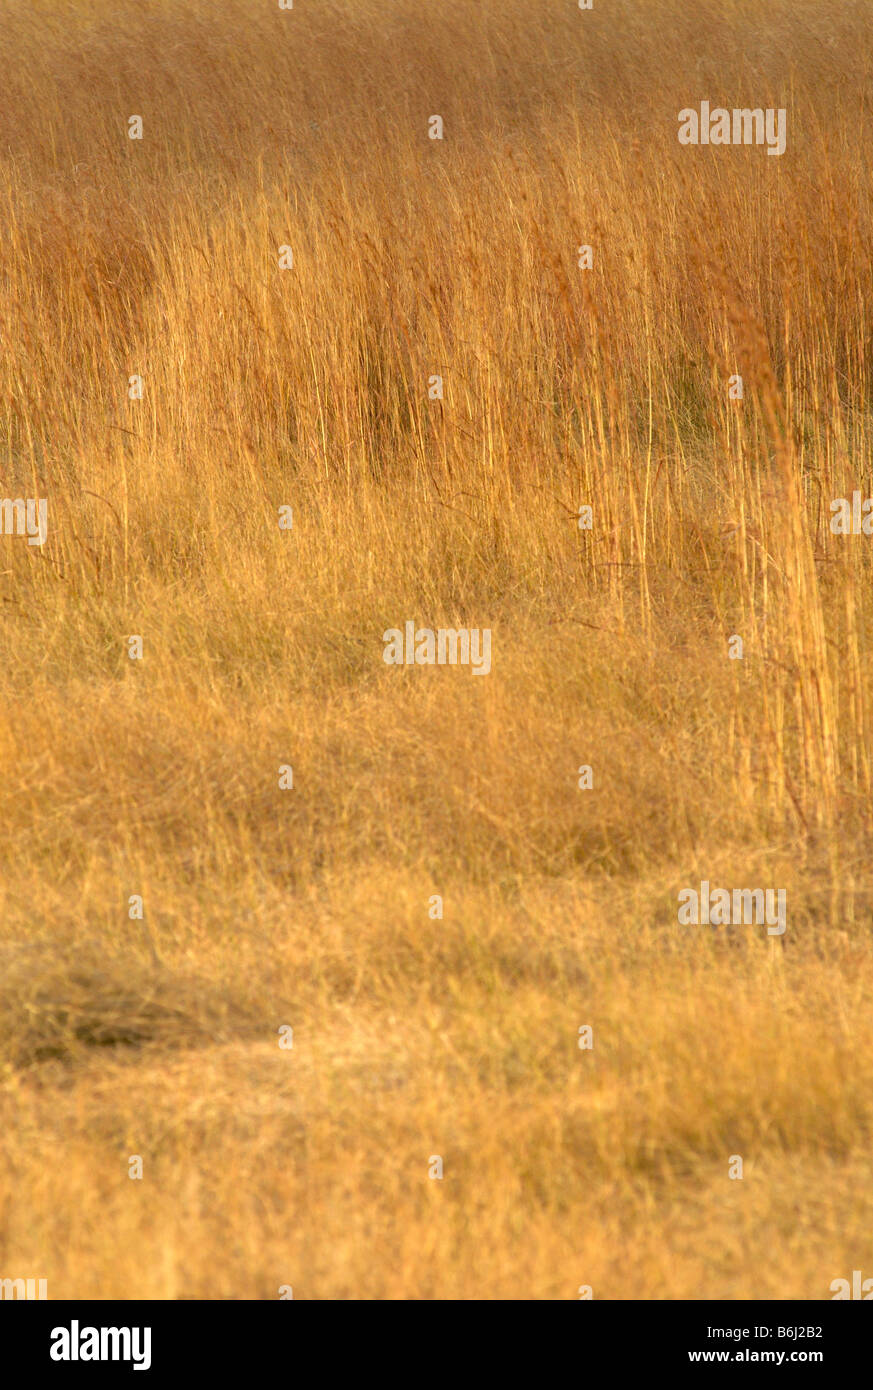 Red grass in Zimbabwe's Rhodes Matopos National Park Stock Photo